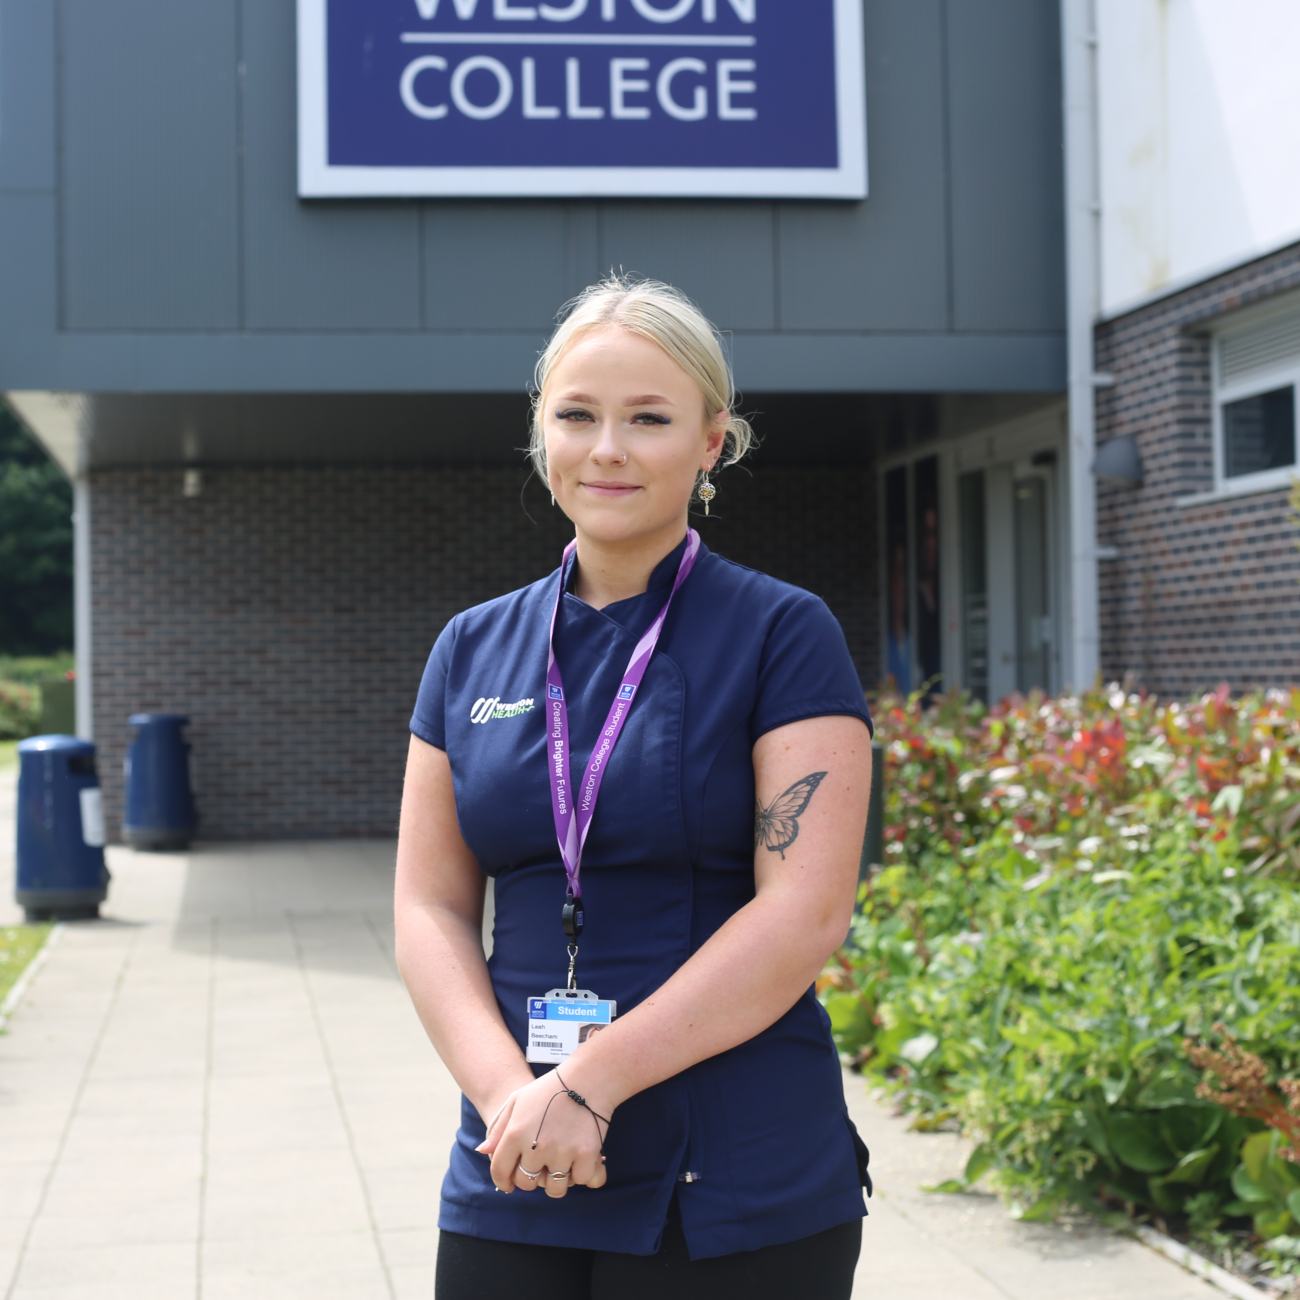 Female Health and Social Student standing in front of College sign 